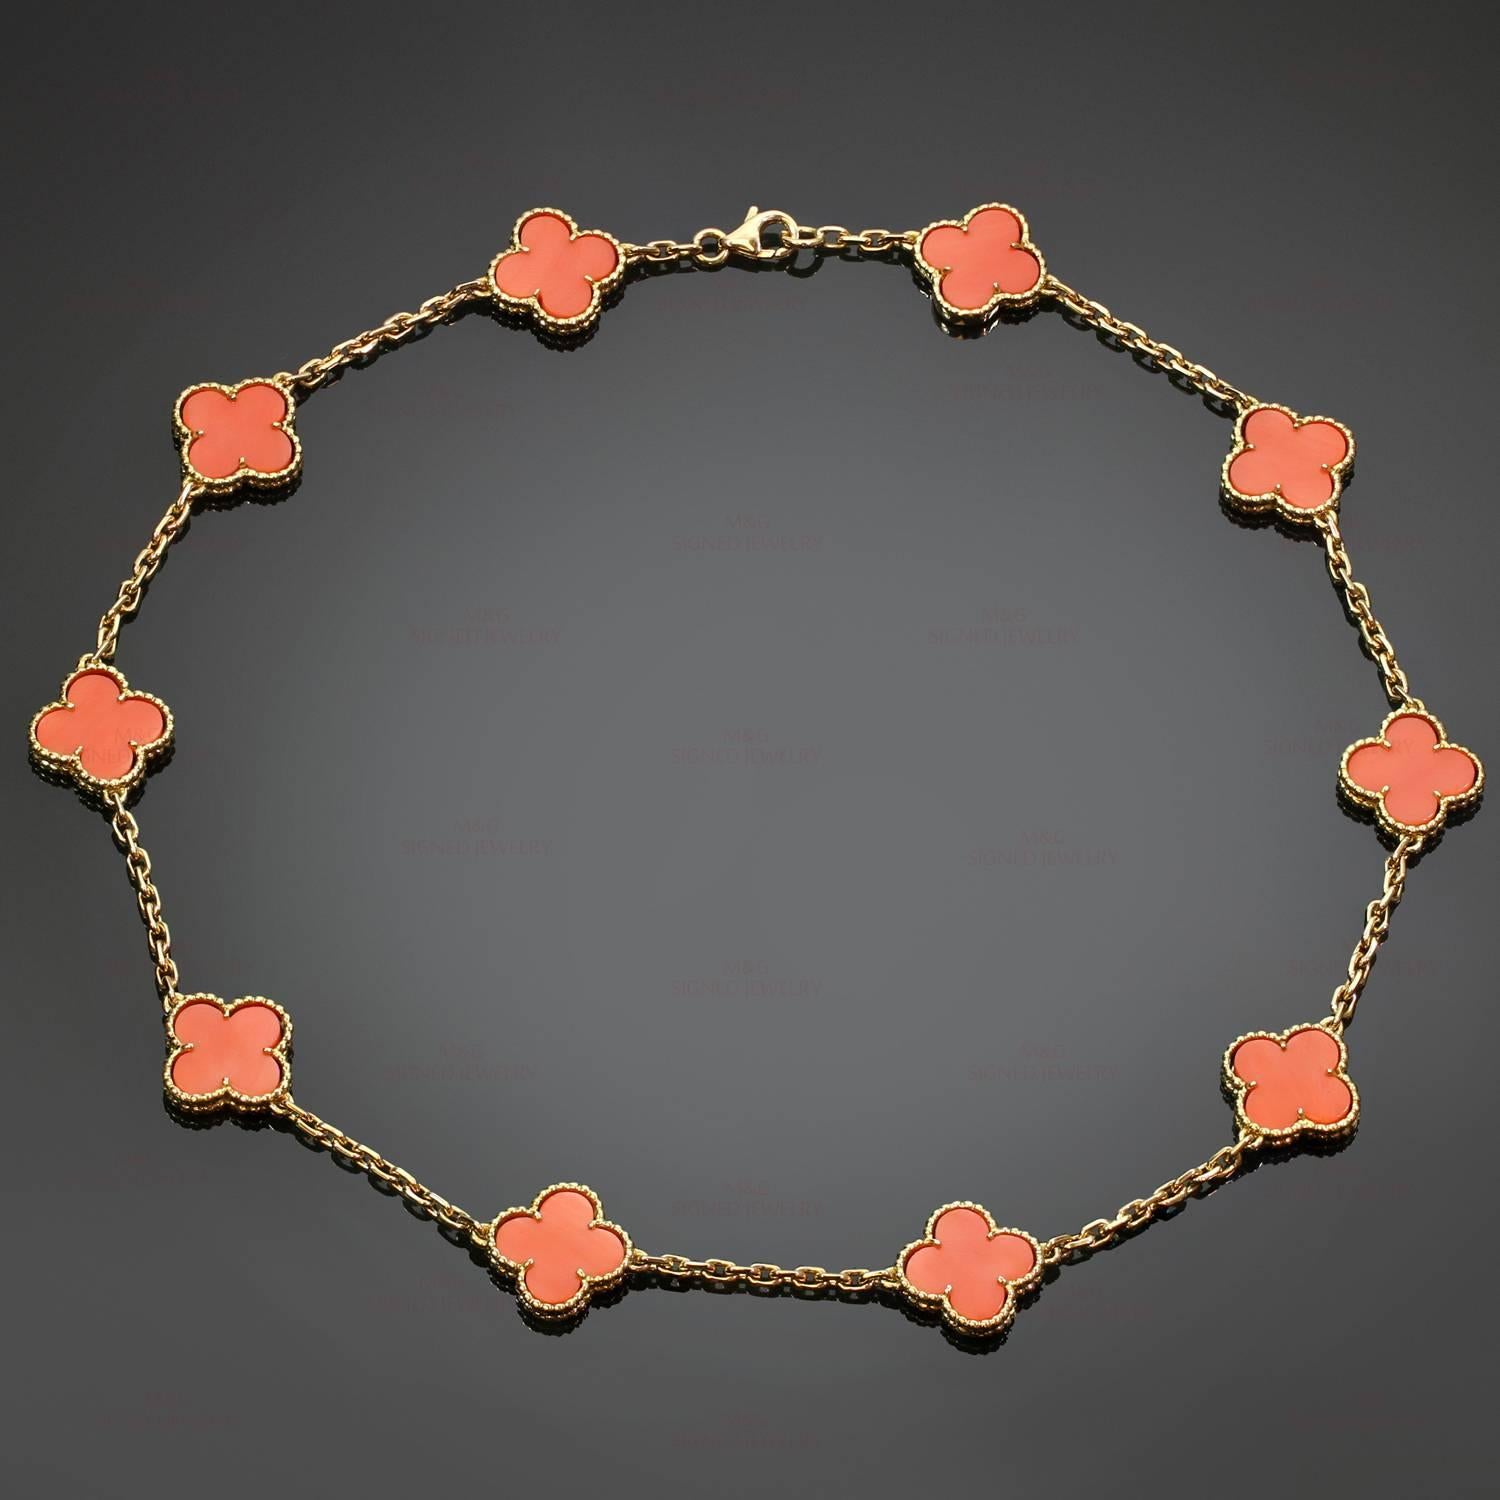 This rare out-of-production Van Cleef & Arpels necklace is crafted in 18k yellow gold and features 10 lucky clover motifs beautifully inlaid with coral in round bead settings. Made in France circa 1990s. Measurements: 0.59